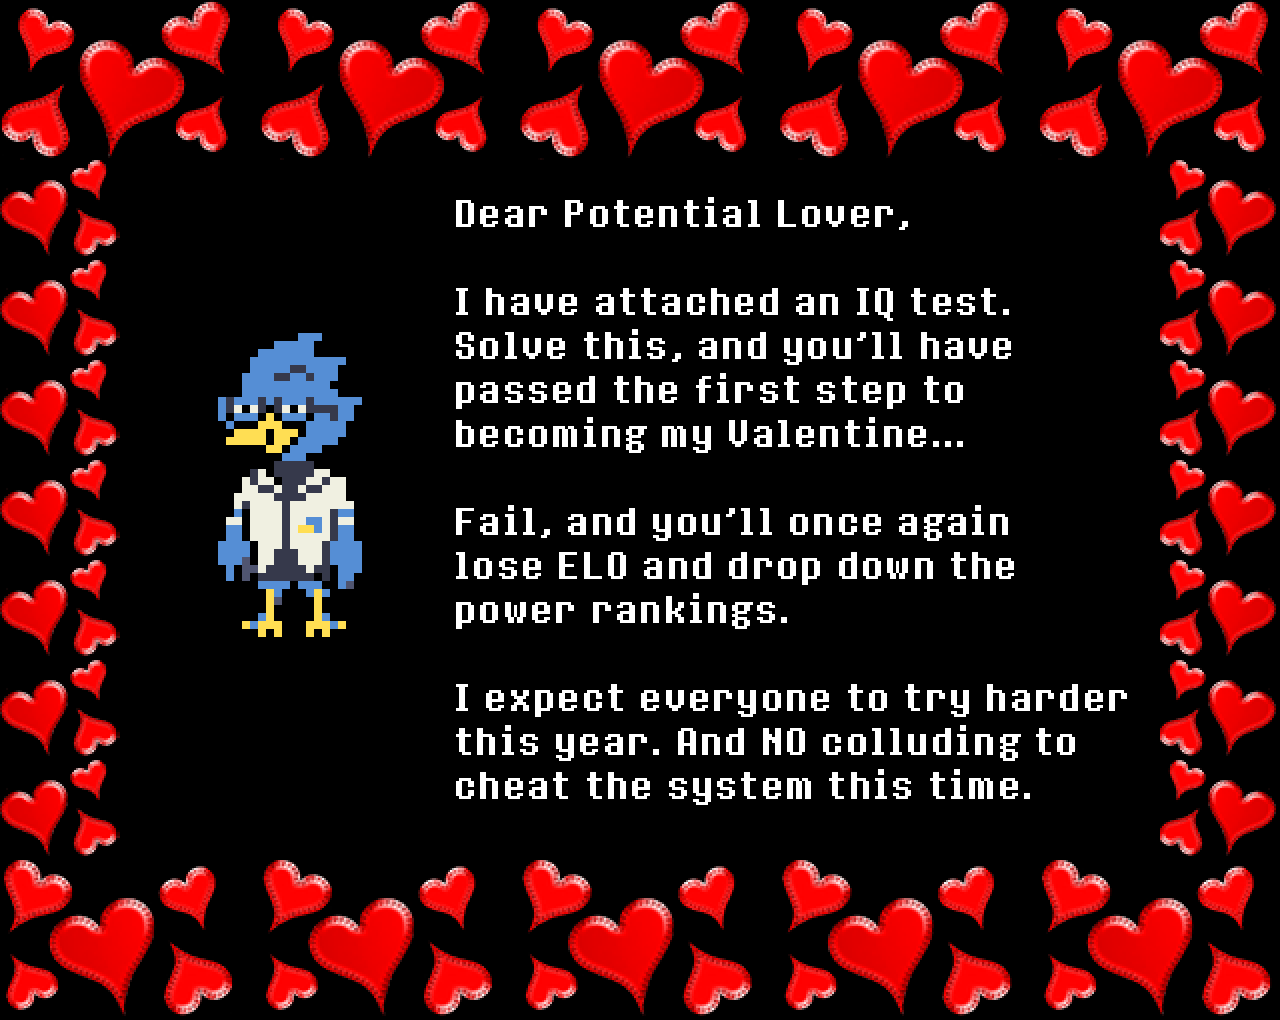 Berdly: Dear Potential Lover,

I have attached an IQ test. Solve this, and you’ll have passed the first step to becoming my Valentine… 

Fail, and you’ll once again lose ELO and drop down the power rankings.

I expect everyone to try harder this year. And NO colluding to cheat the system this time.